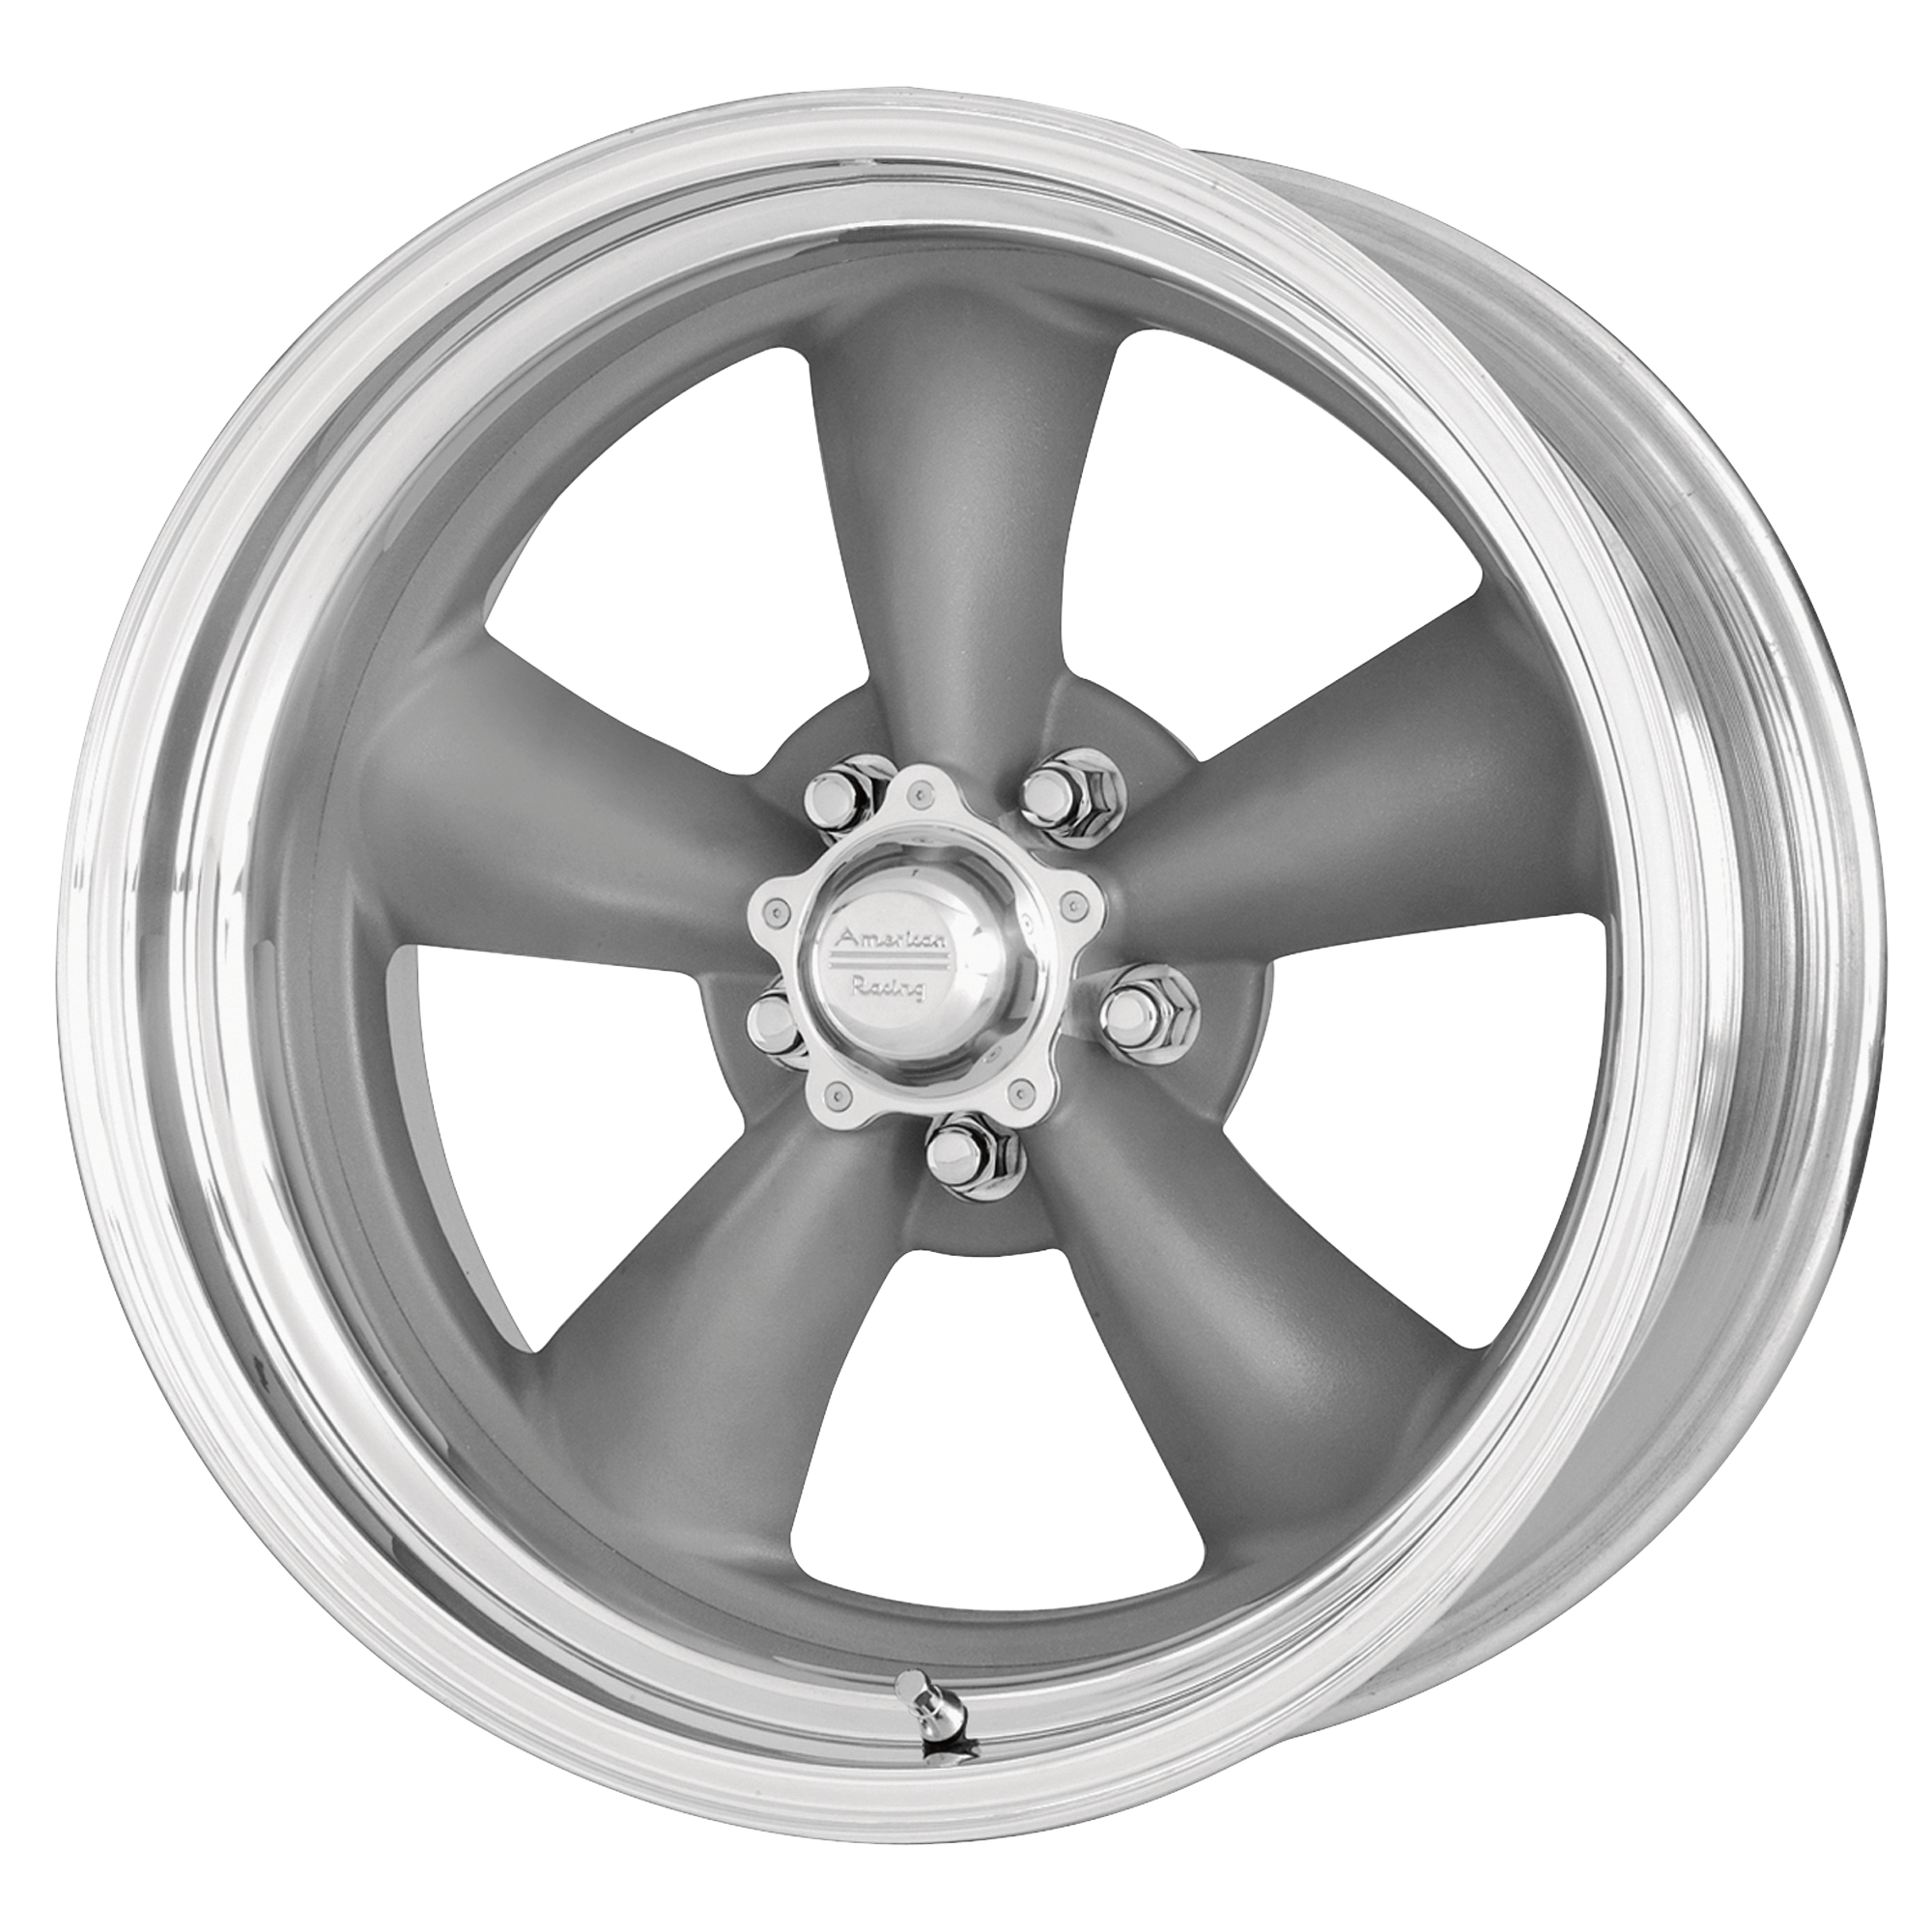 CLASSIC TORQ THRUST II ONE PIECE 18x7 5x120.65 MAG GRAY W/ MACHINED LIP (6 mm) - Tires and Engine Performance